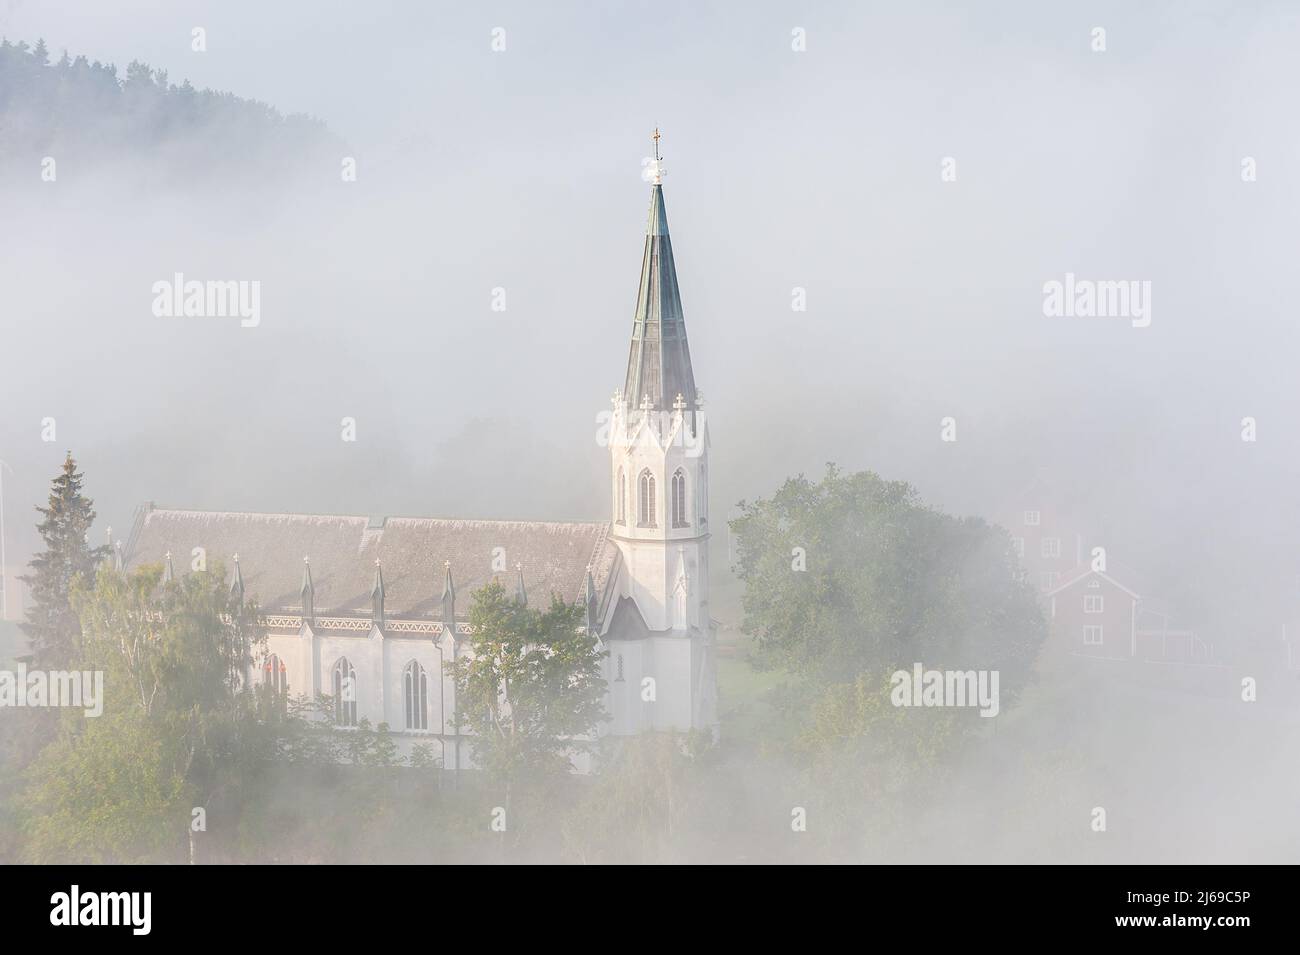 Church in the mist, Sweden. Stock Photo